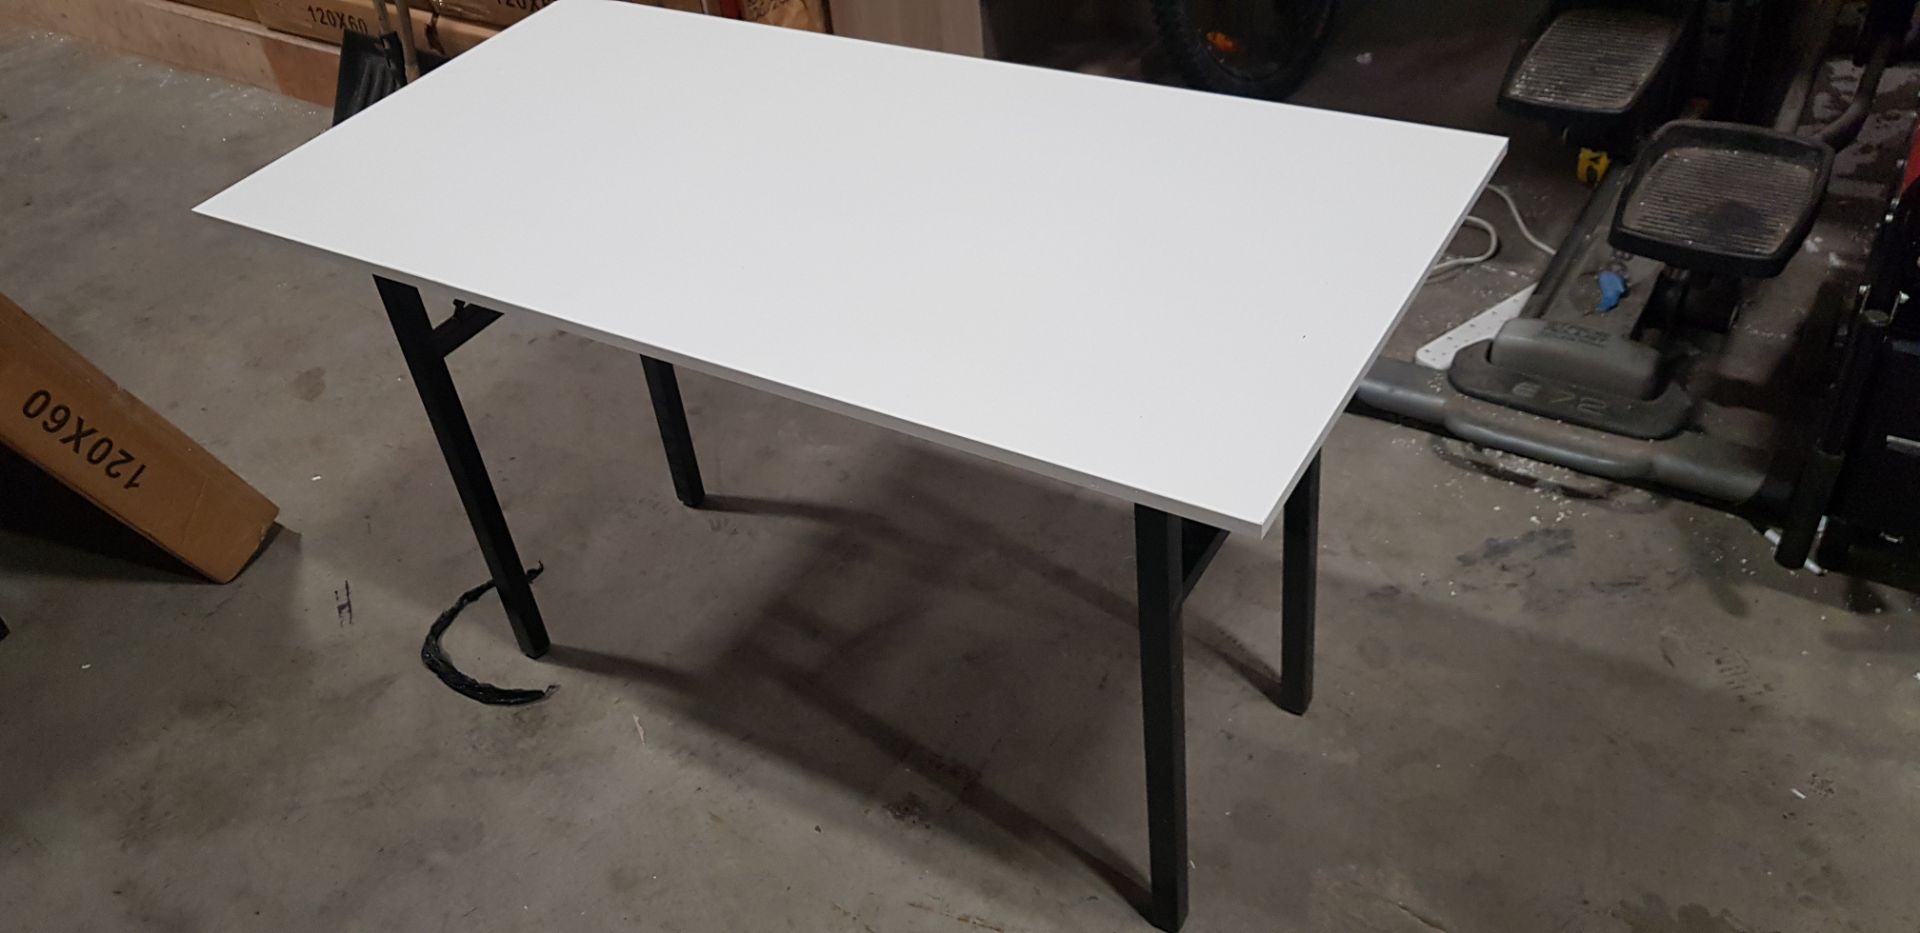 4 X BOXED WHITE FOLDABLE RECTANGULAR TABLES 60CM X 120CM (SOME MINOR SCUFFING)